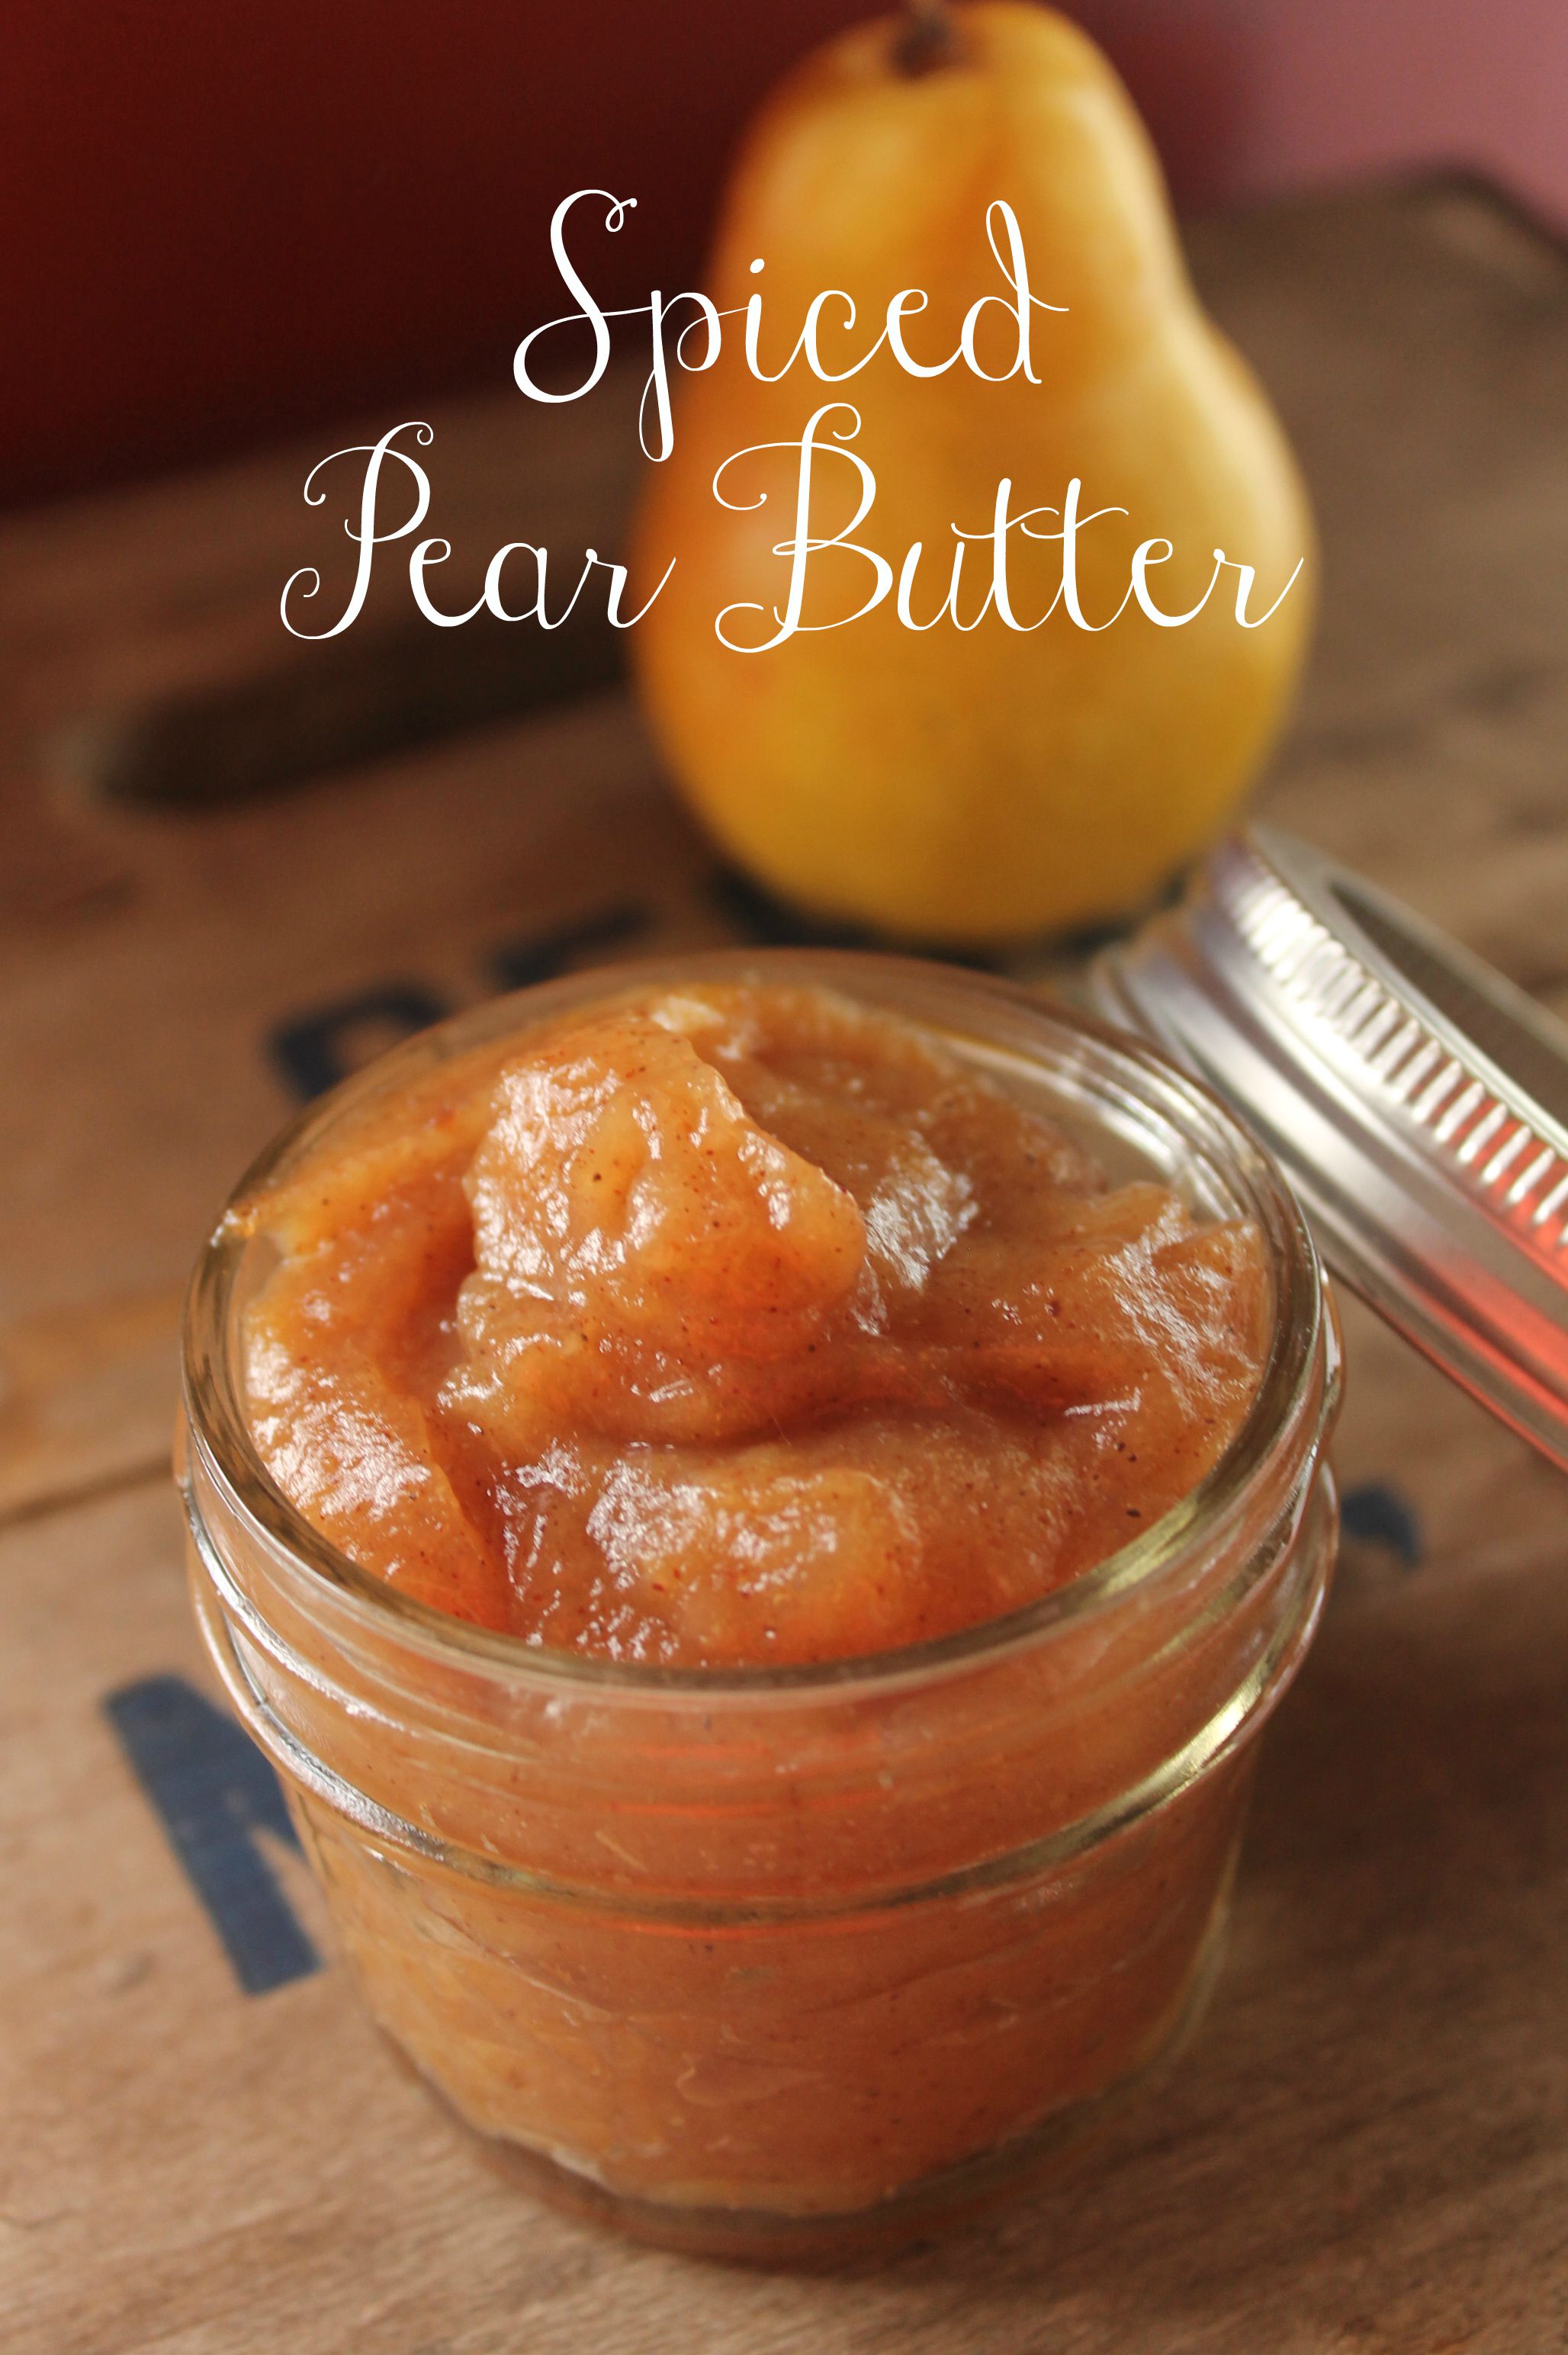 Homemade Spiced Pear Butter Recipe - In less than an hour you can make delicious homemade pear butter. Serve it over pancakes, toast, or even ice cream.